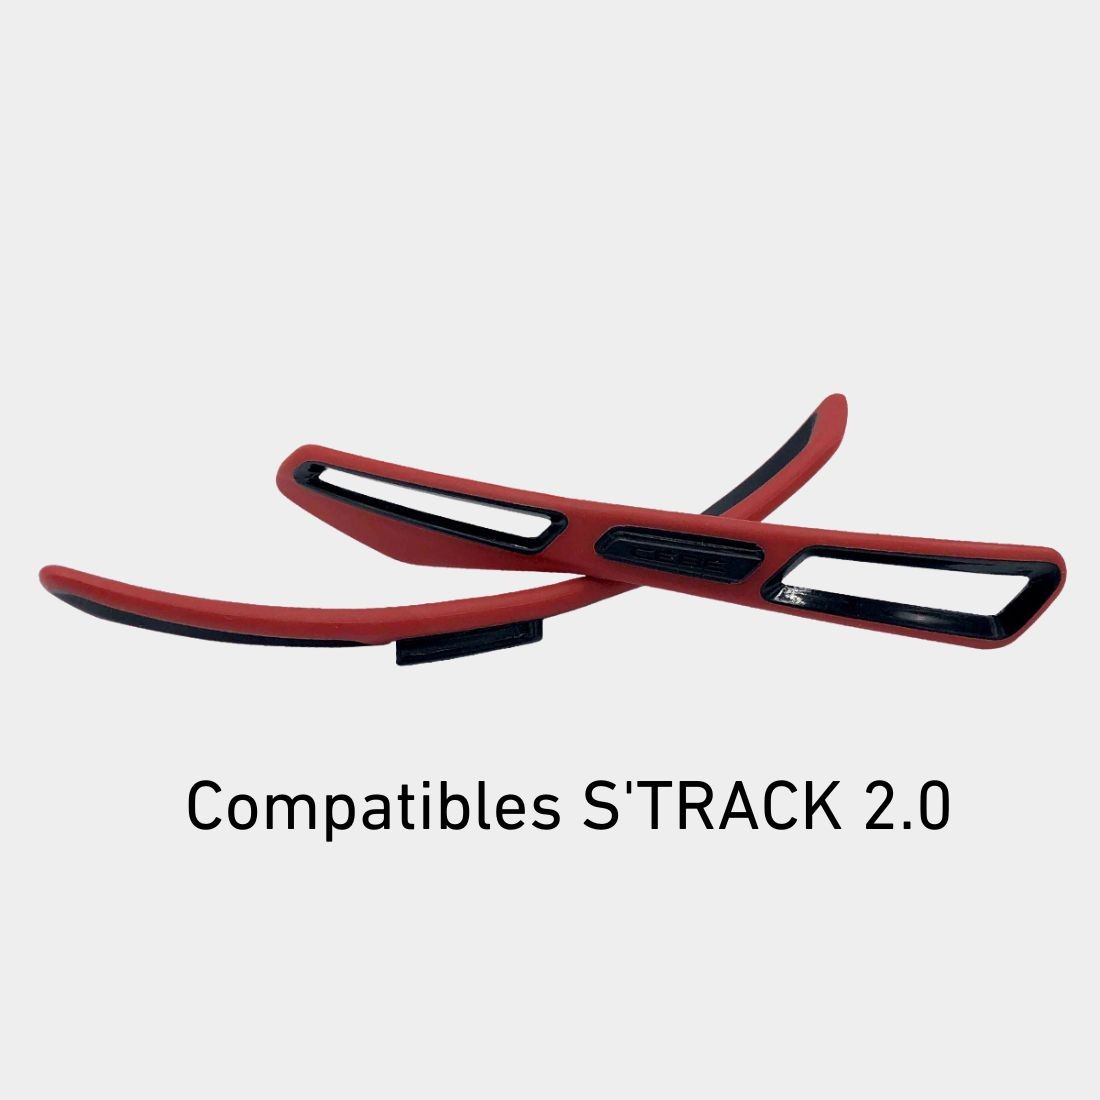 S'TRACK M & L 2.0 - Replacement temples